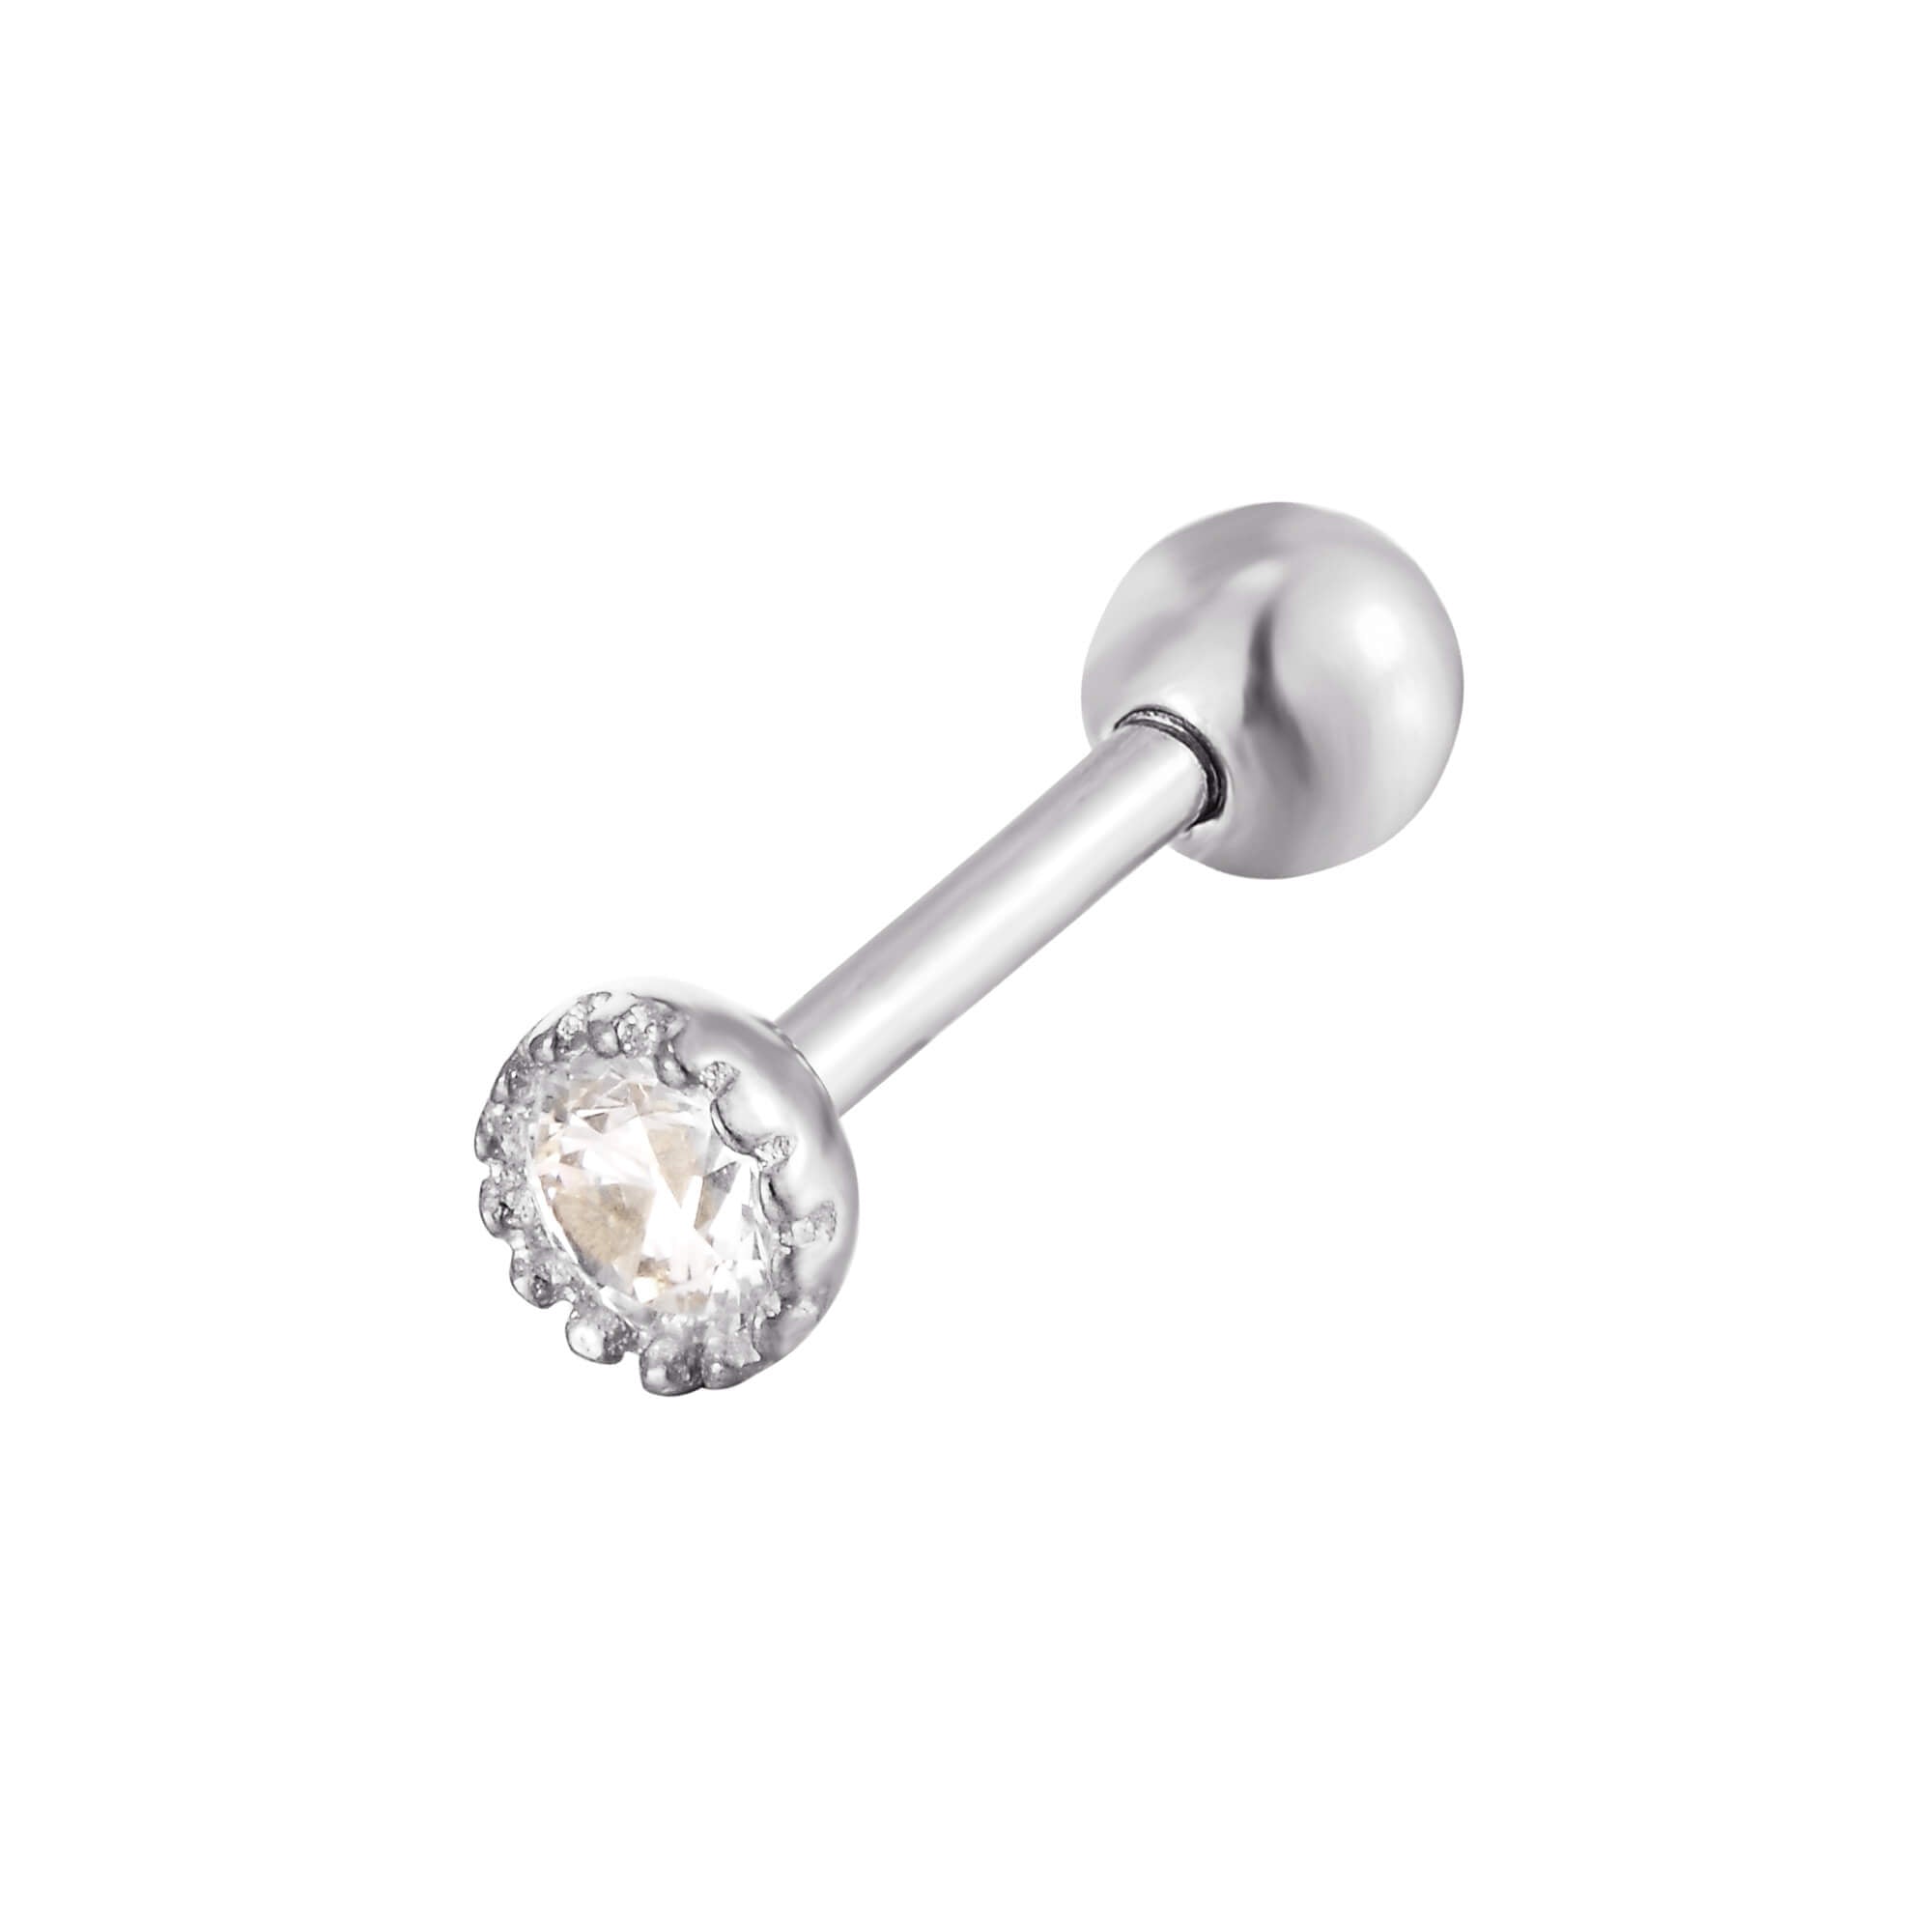 9ct white gold cartilage stud - seolgold